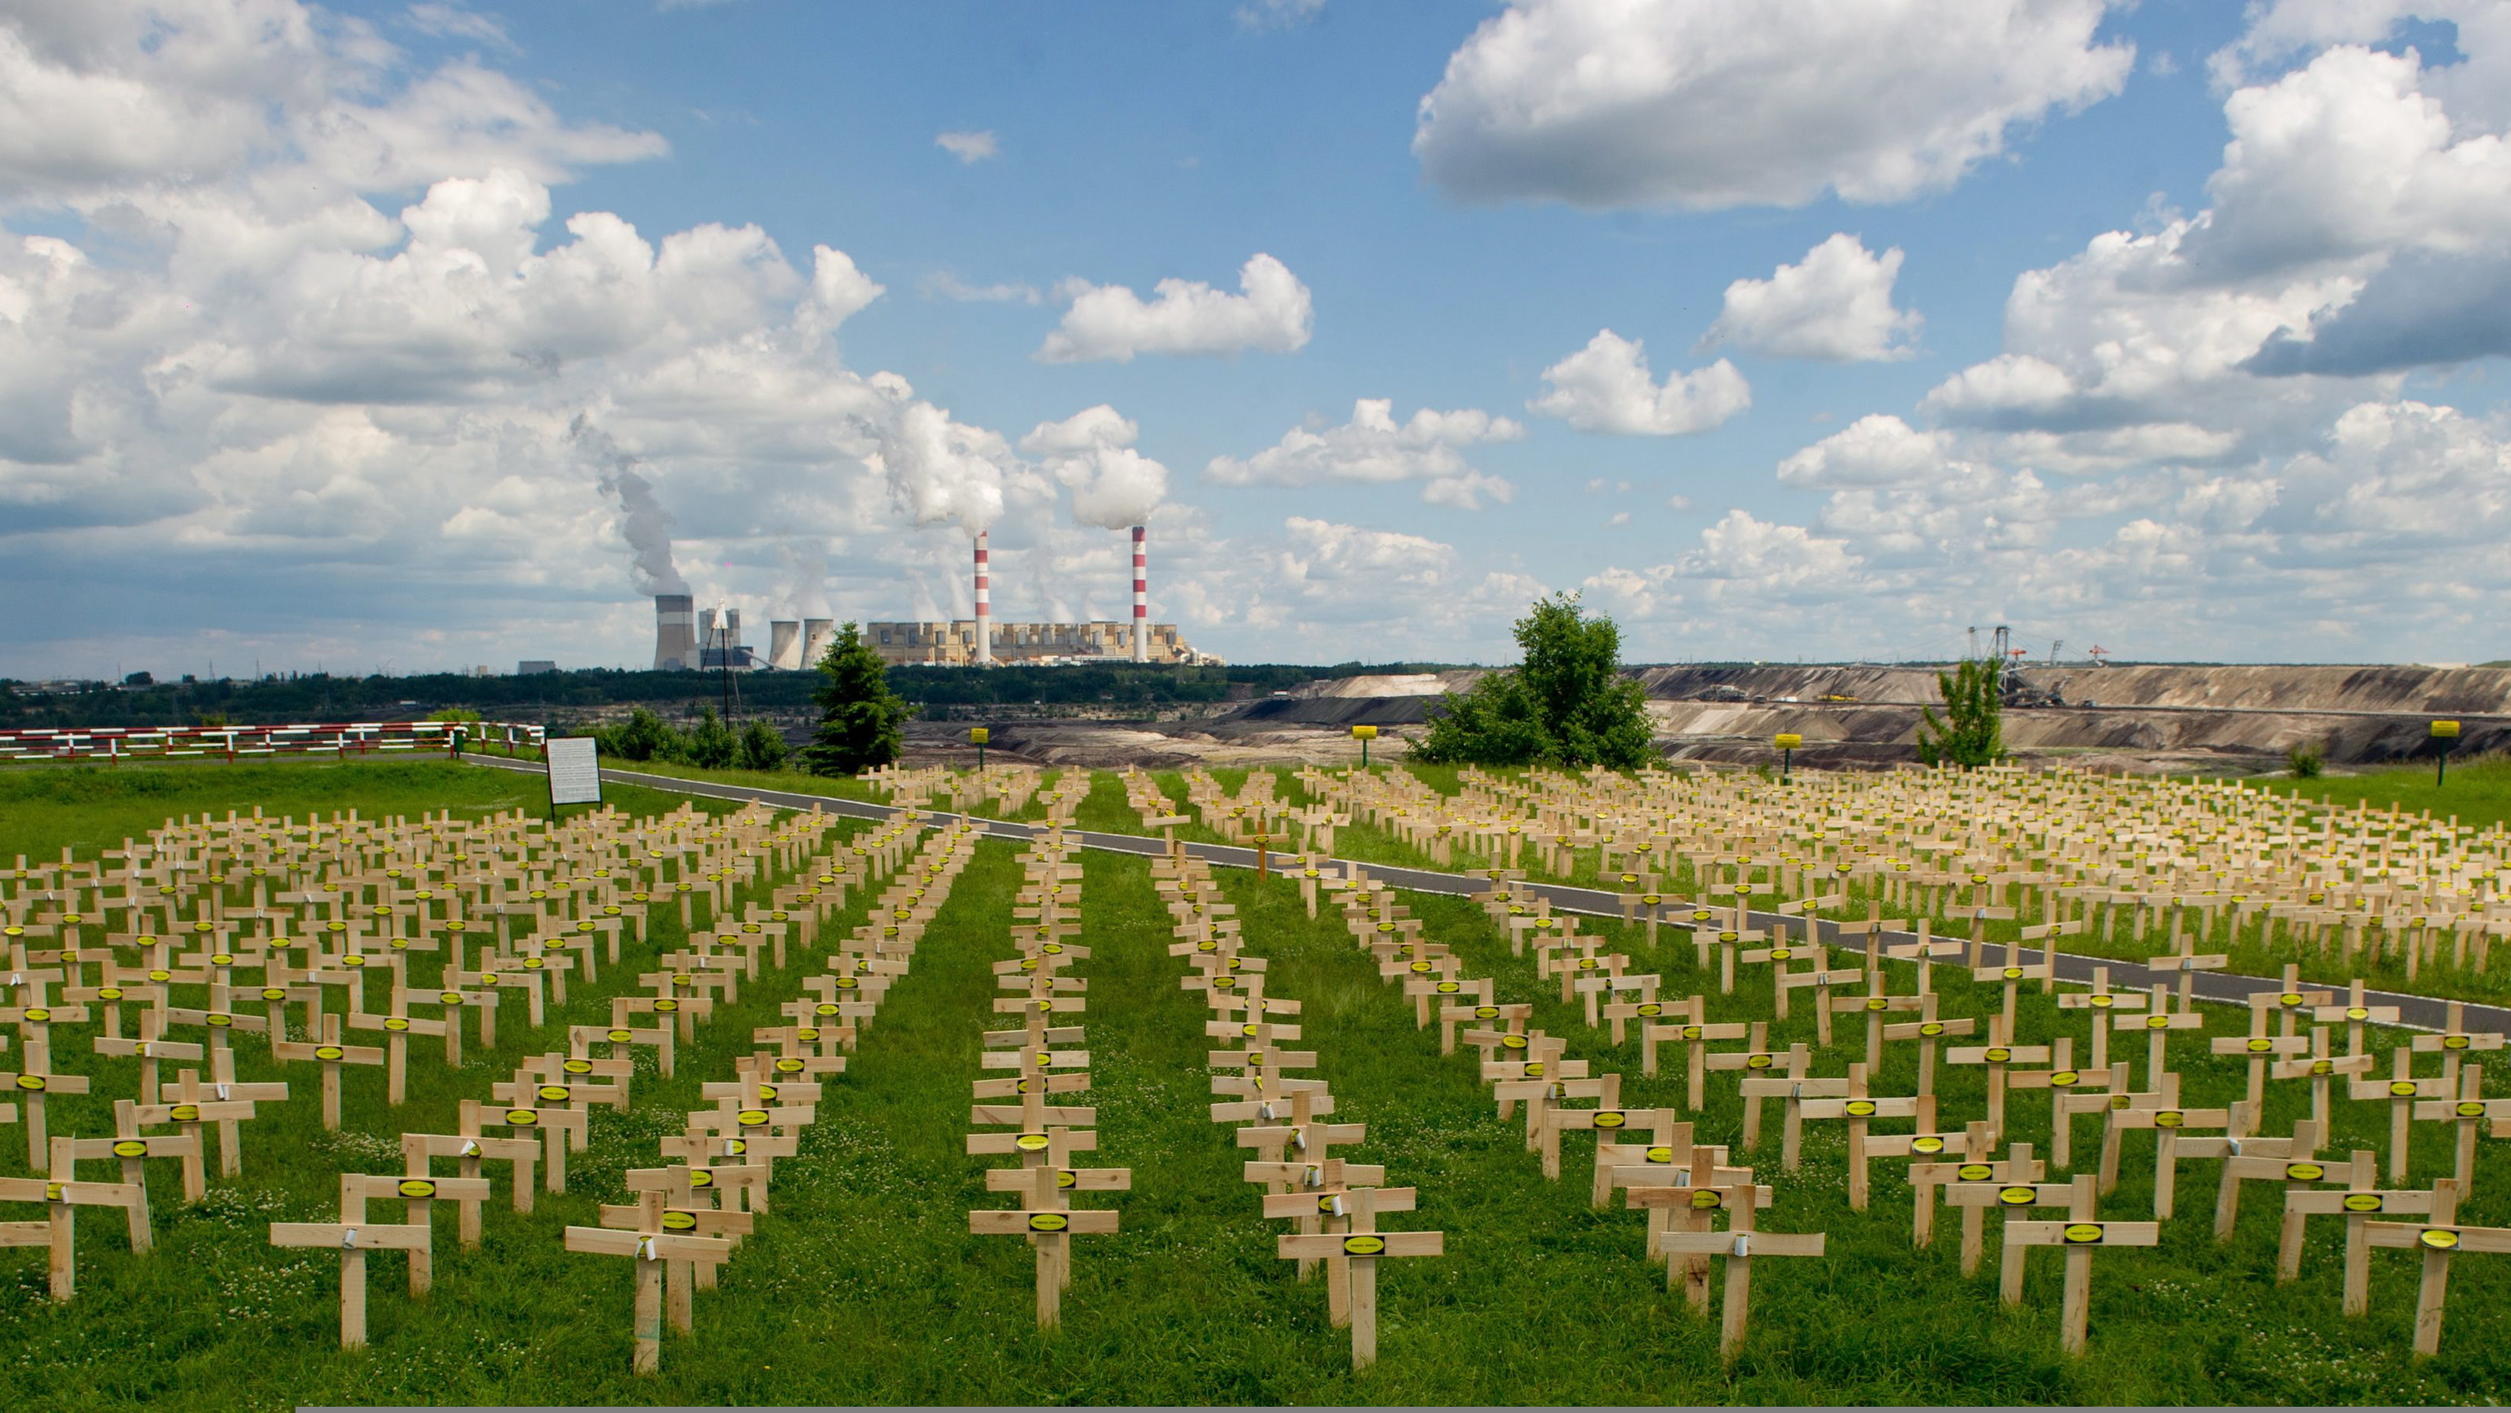 Wodden crosses with the inscription 'Coal kills' and erected by activists of the environment protection organization Greenpeace are seen near the brown coal mine and power plant 'Belchatow' in the Kleszczowo village, central Poland